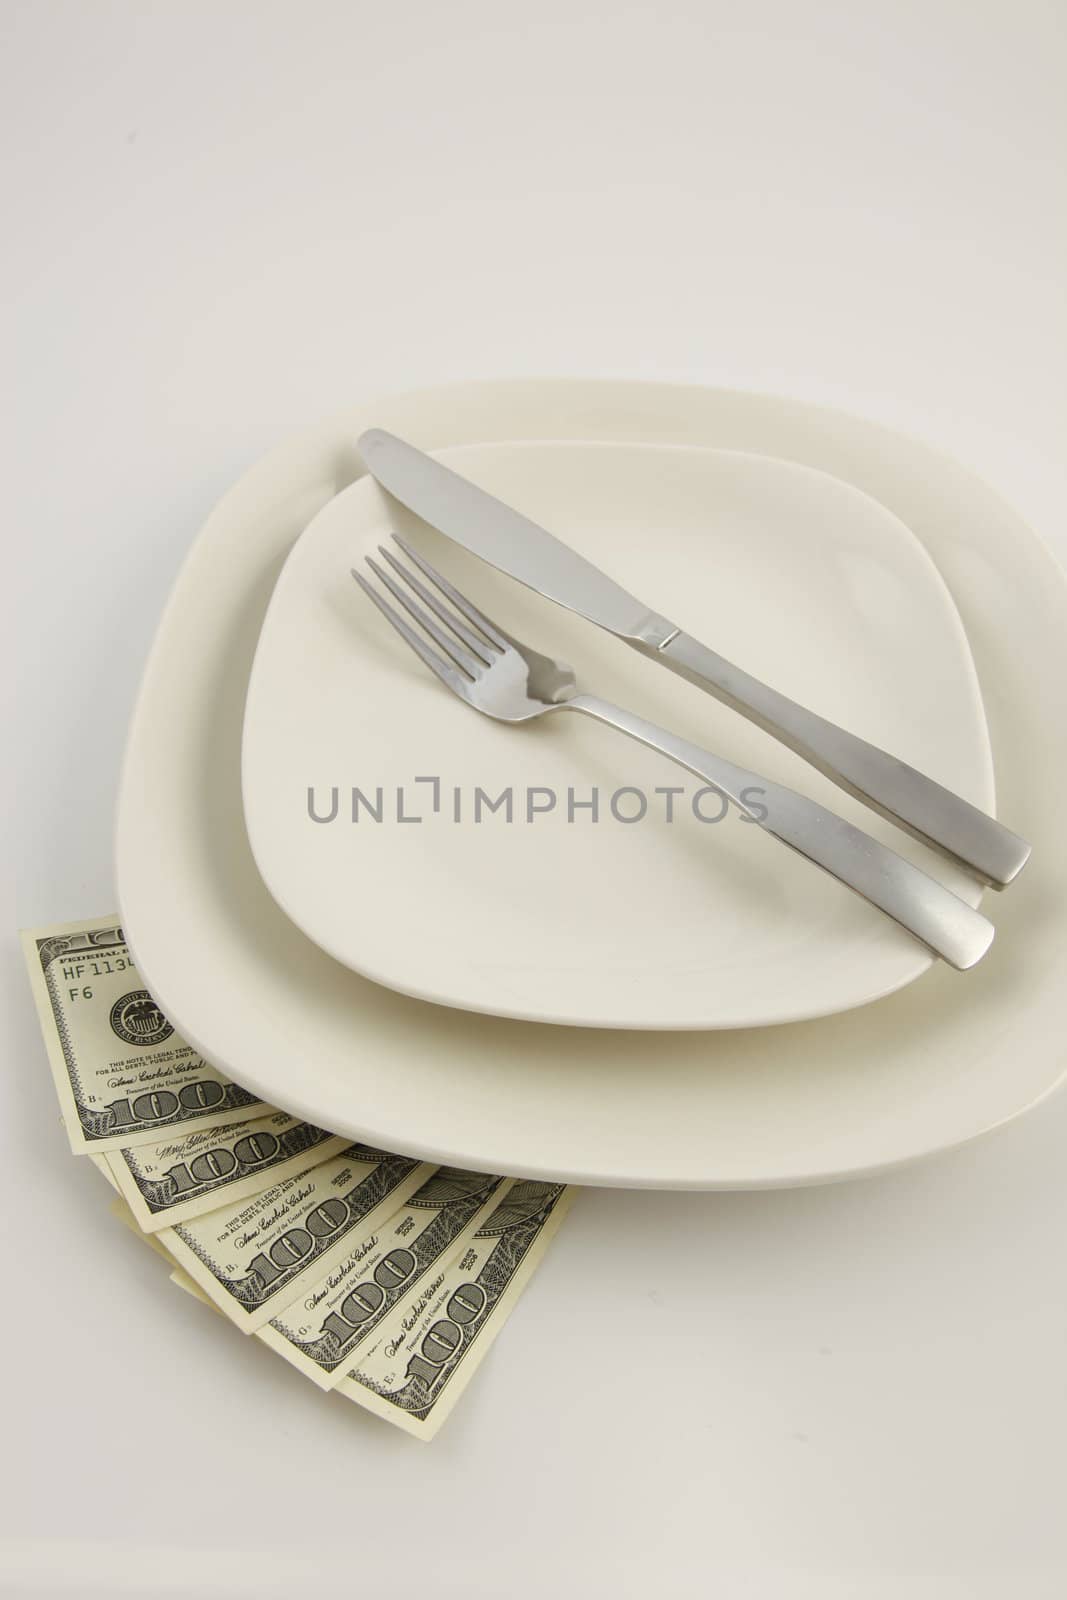 Five 100 US Dolllar bills under a white plate with a knife and fork